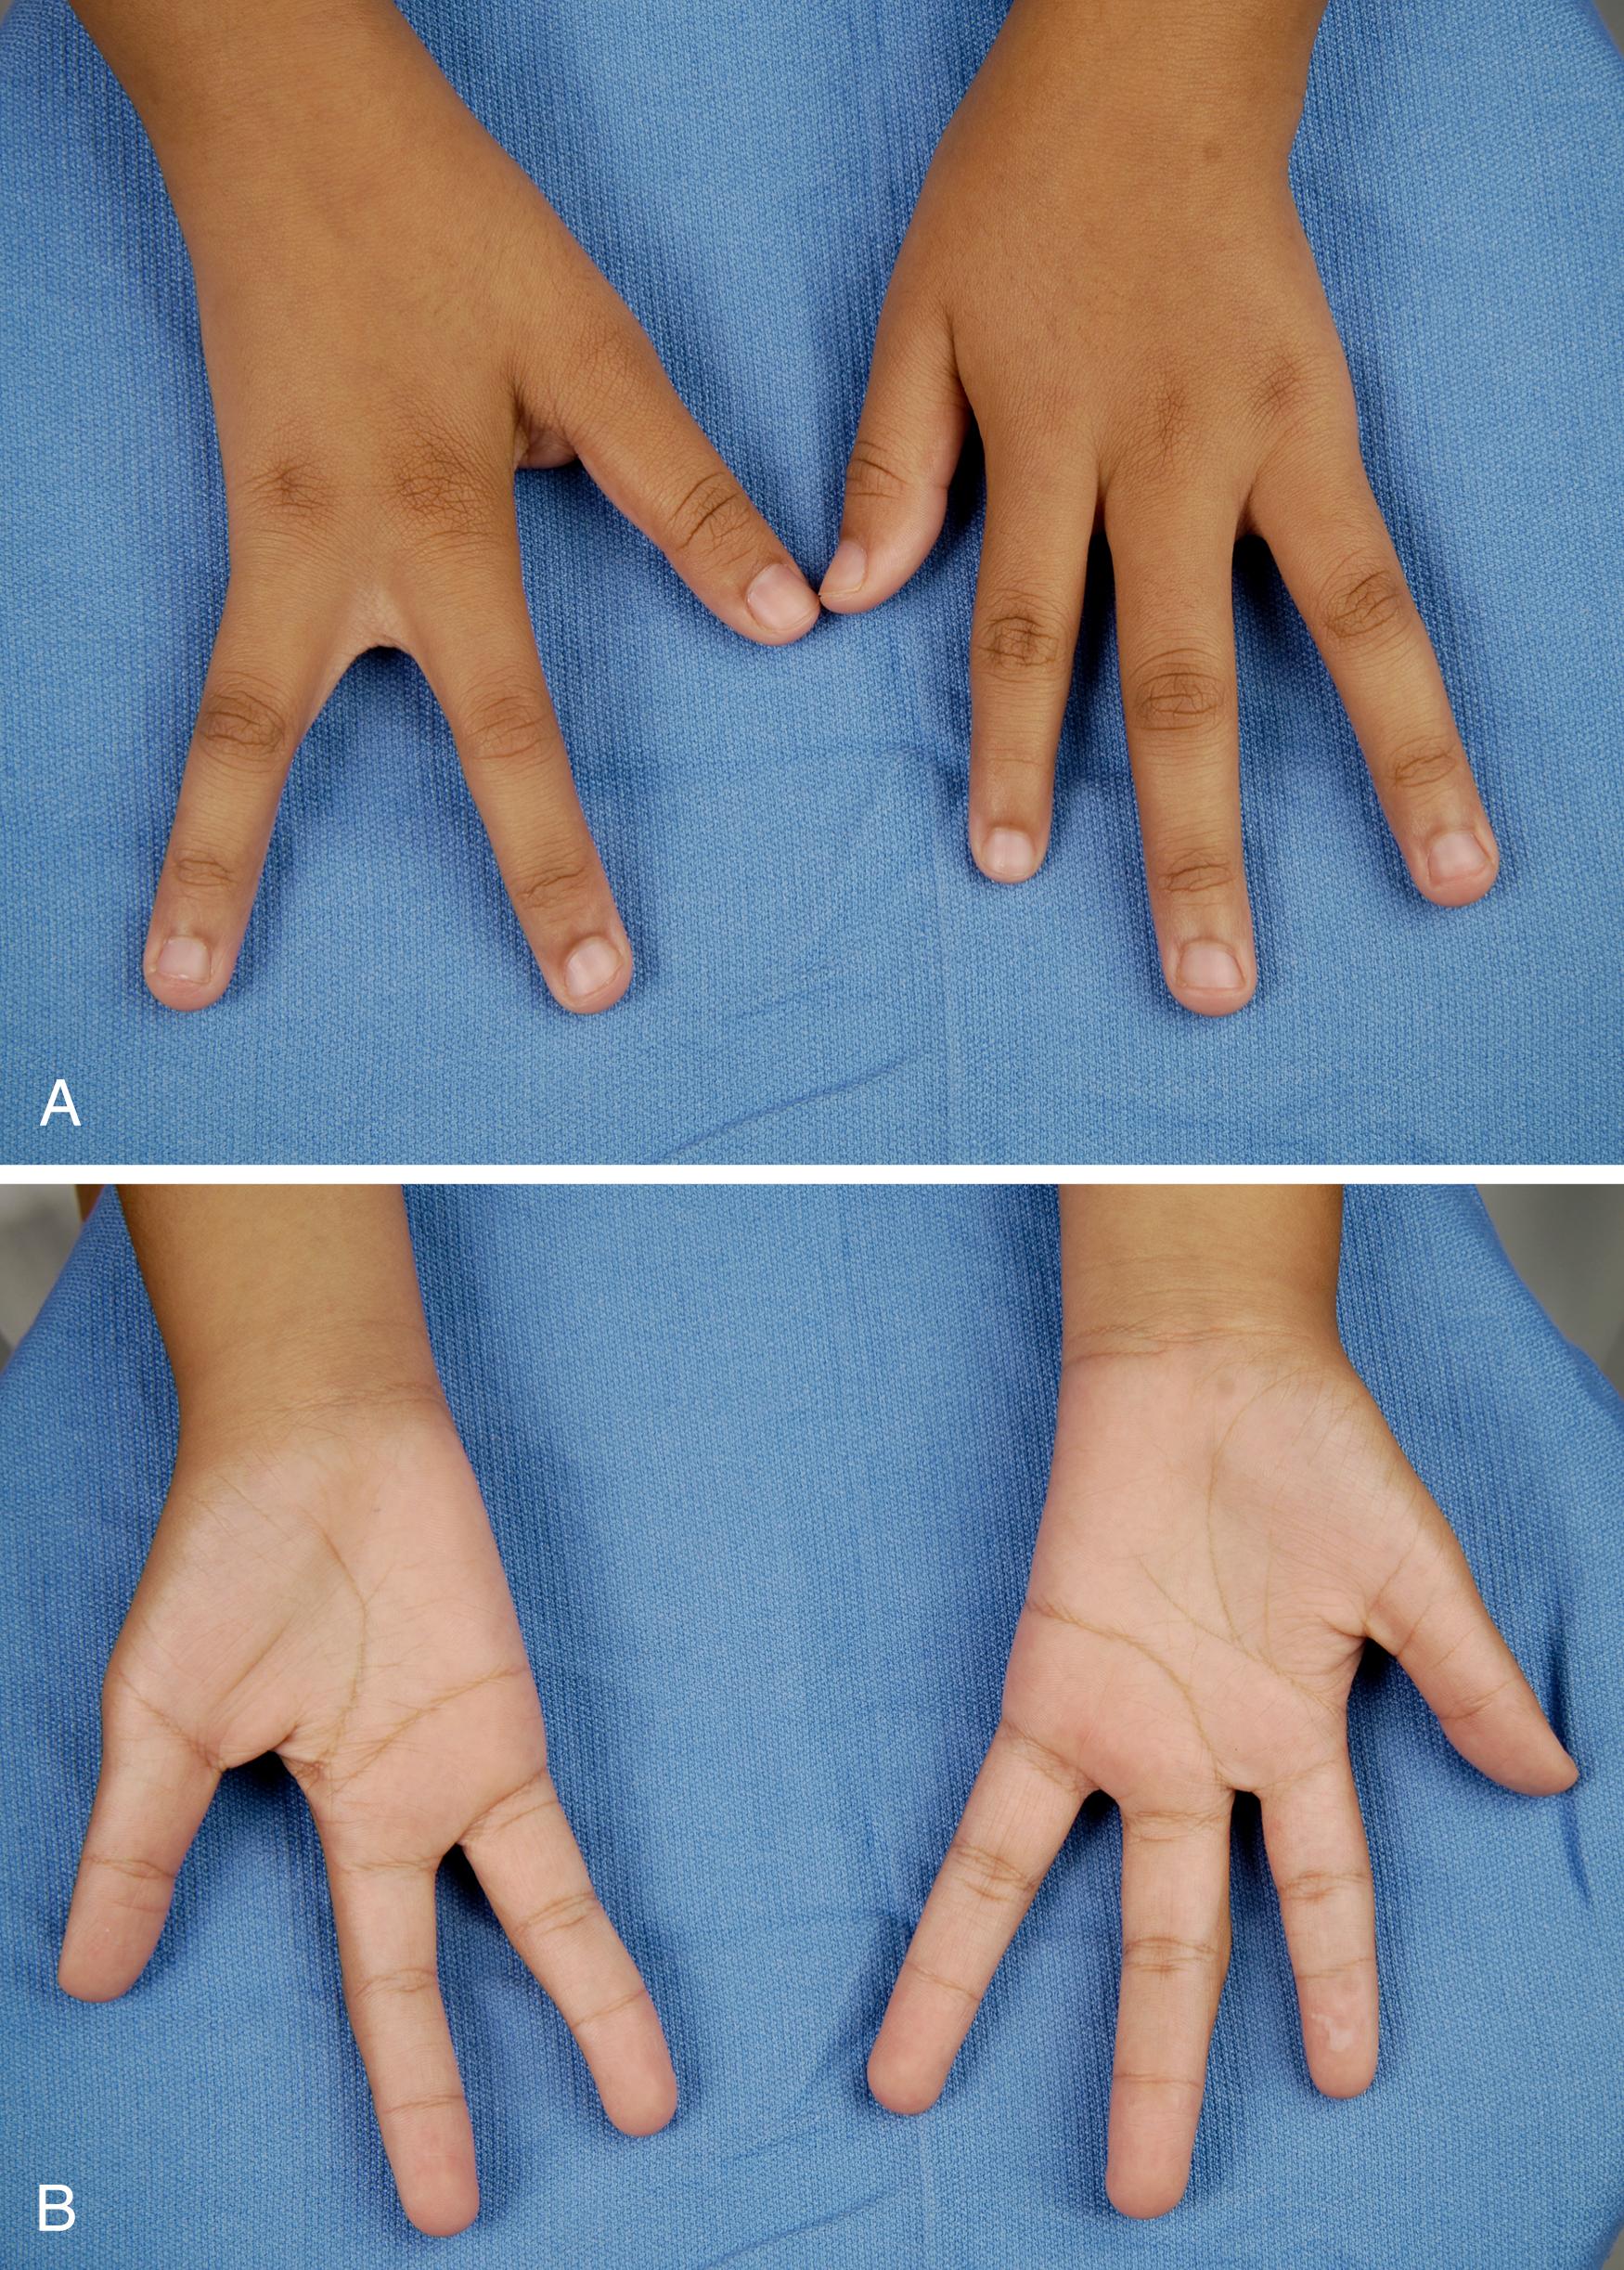 Fig. 38.11, A 9-year-old with ulnar deficiency isolated to her hands. A, Dorsal view with three digits on the right hand and four digits on the left hand. B, Palmar view.